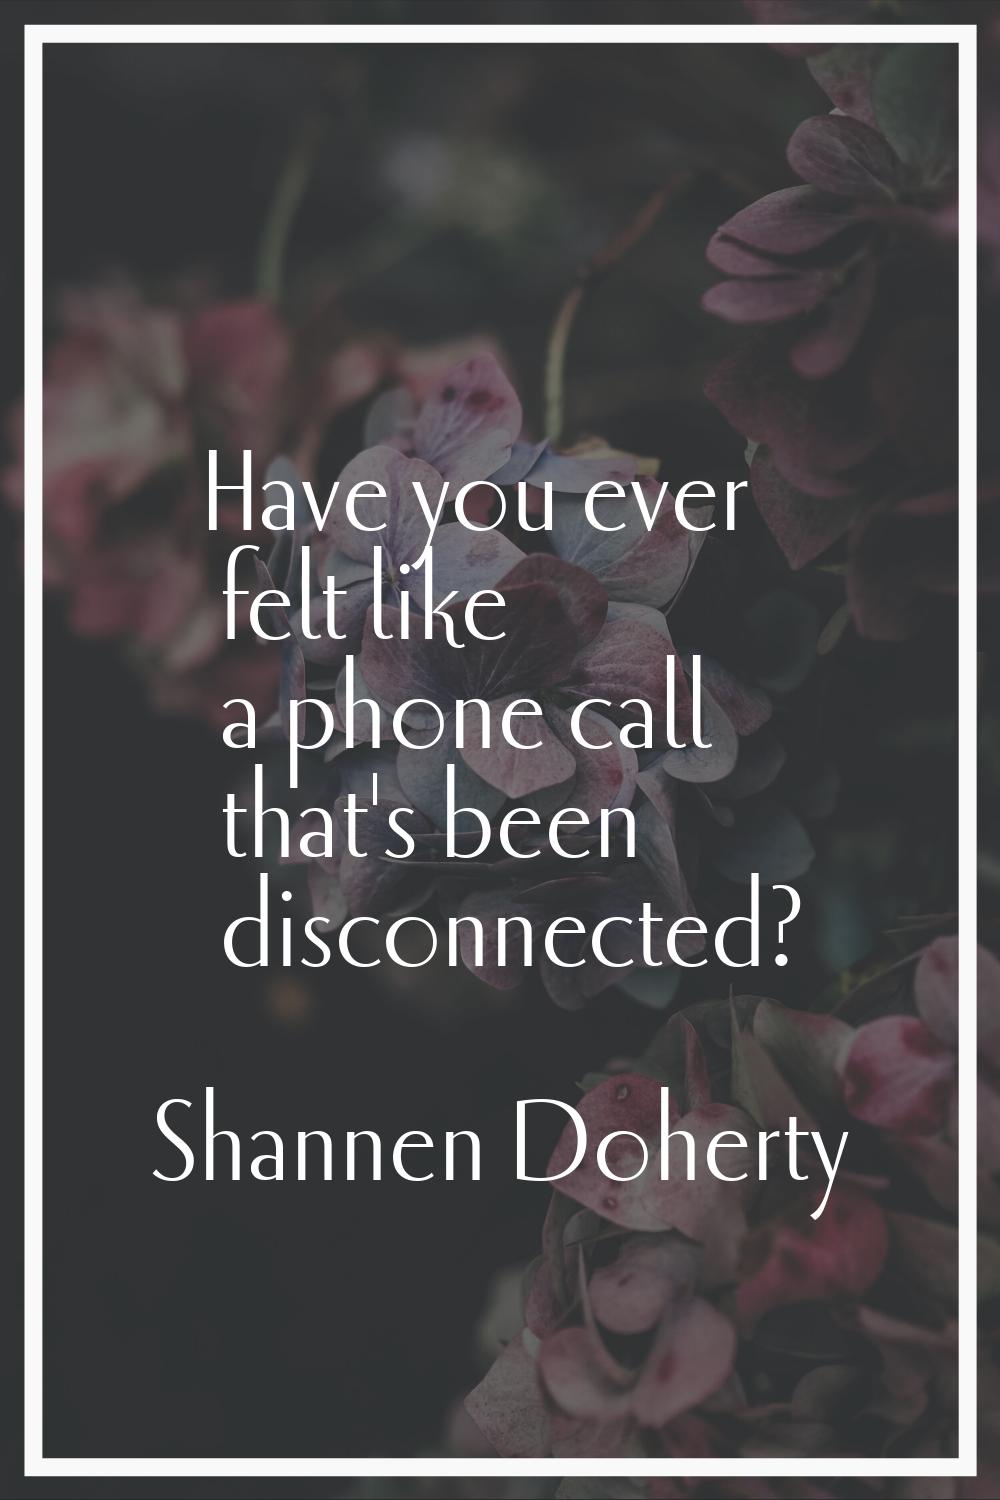 Have you ever felt like a phone call that's been disconnected?